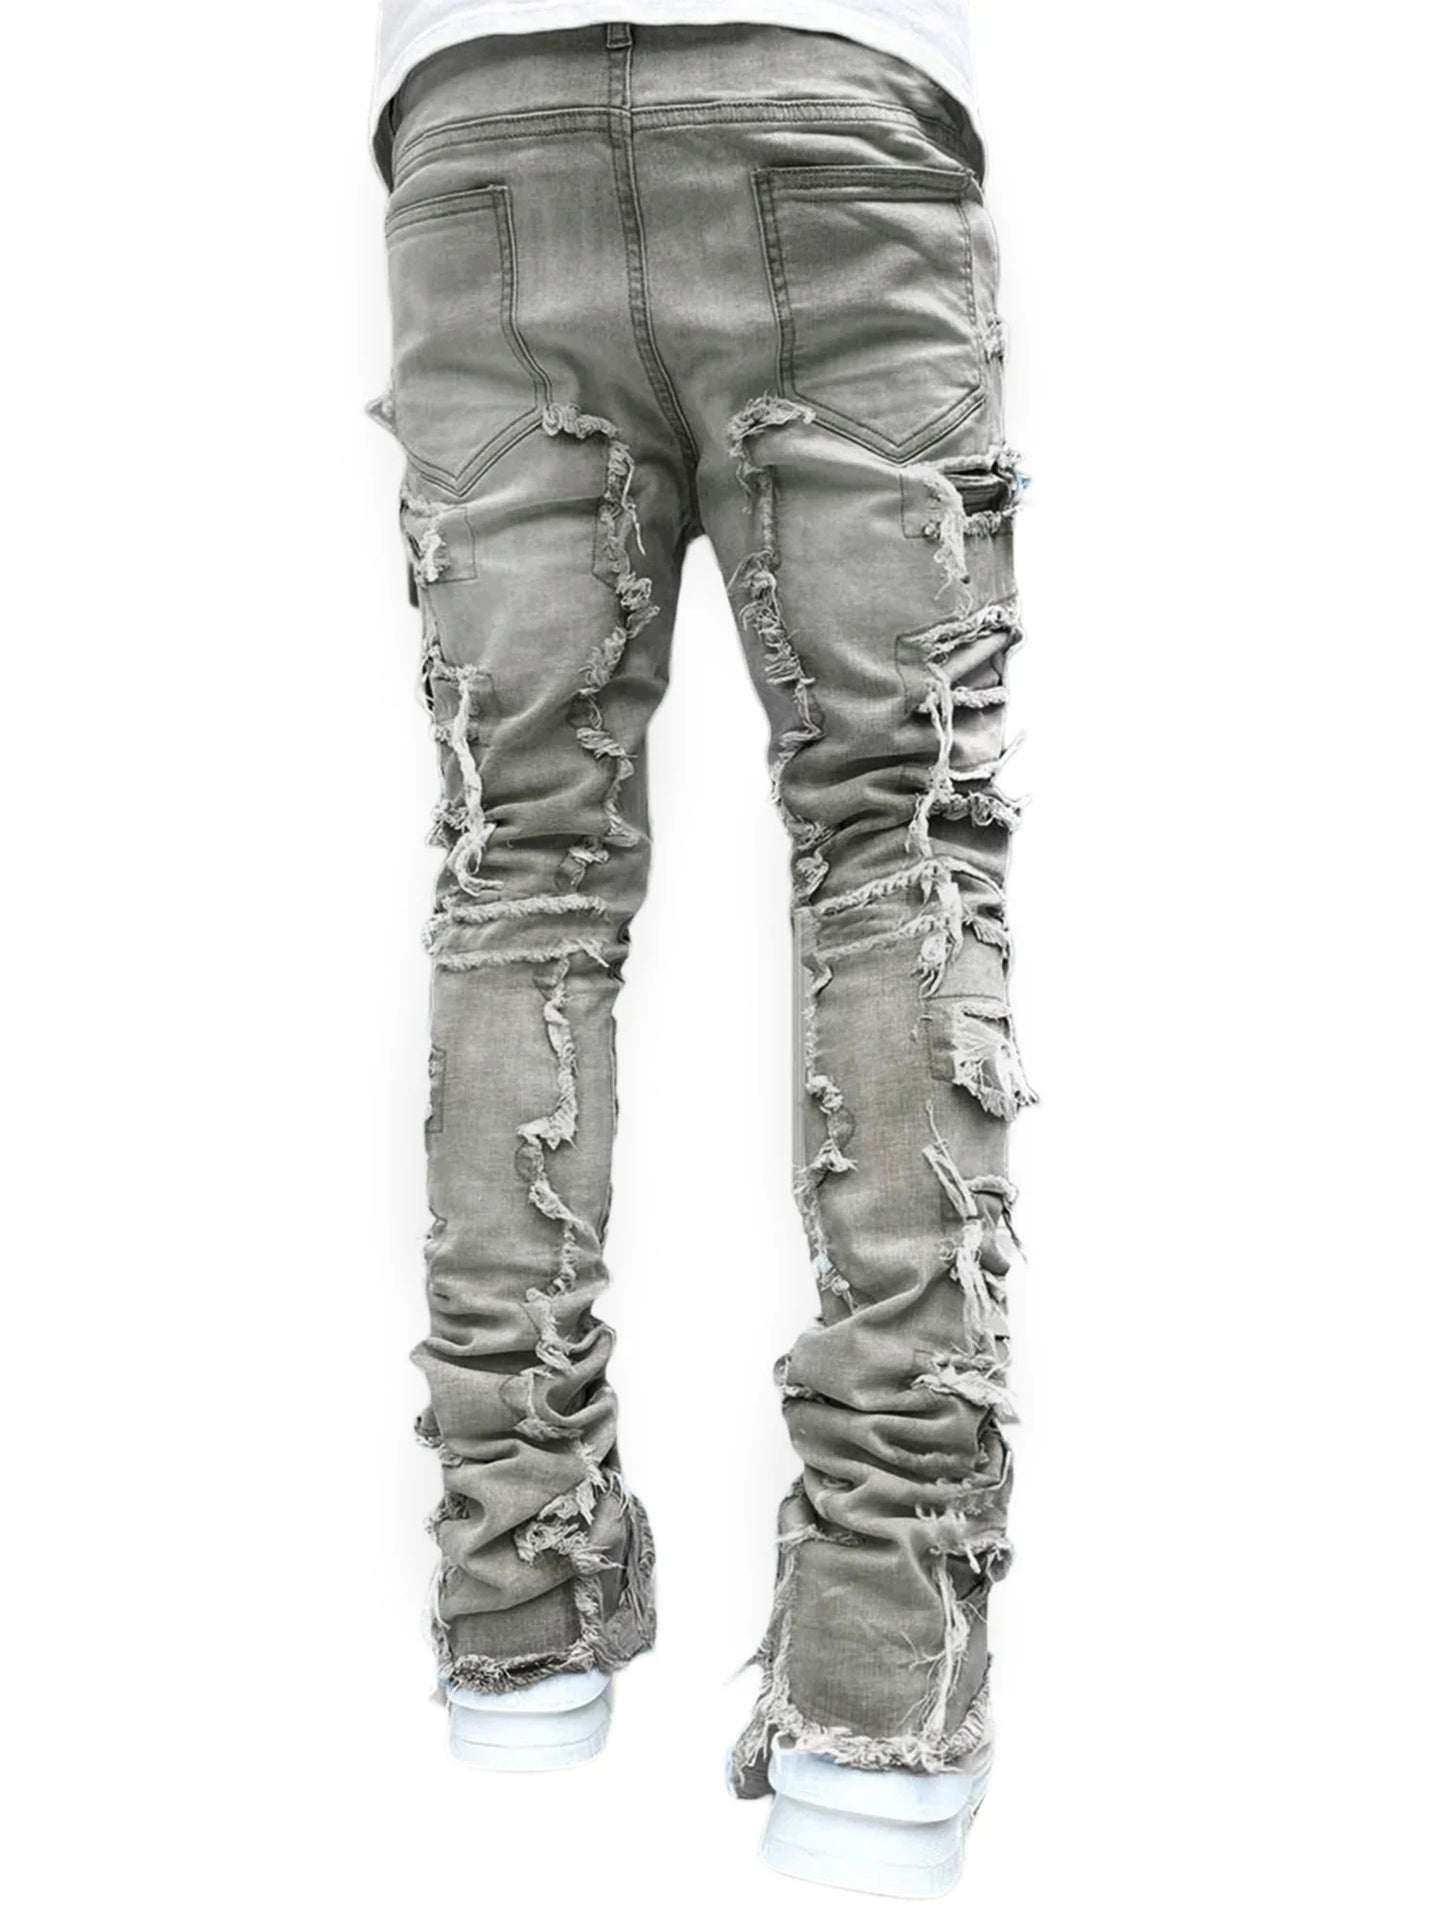 Denim Men's Stretchy Jeans Ripped